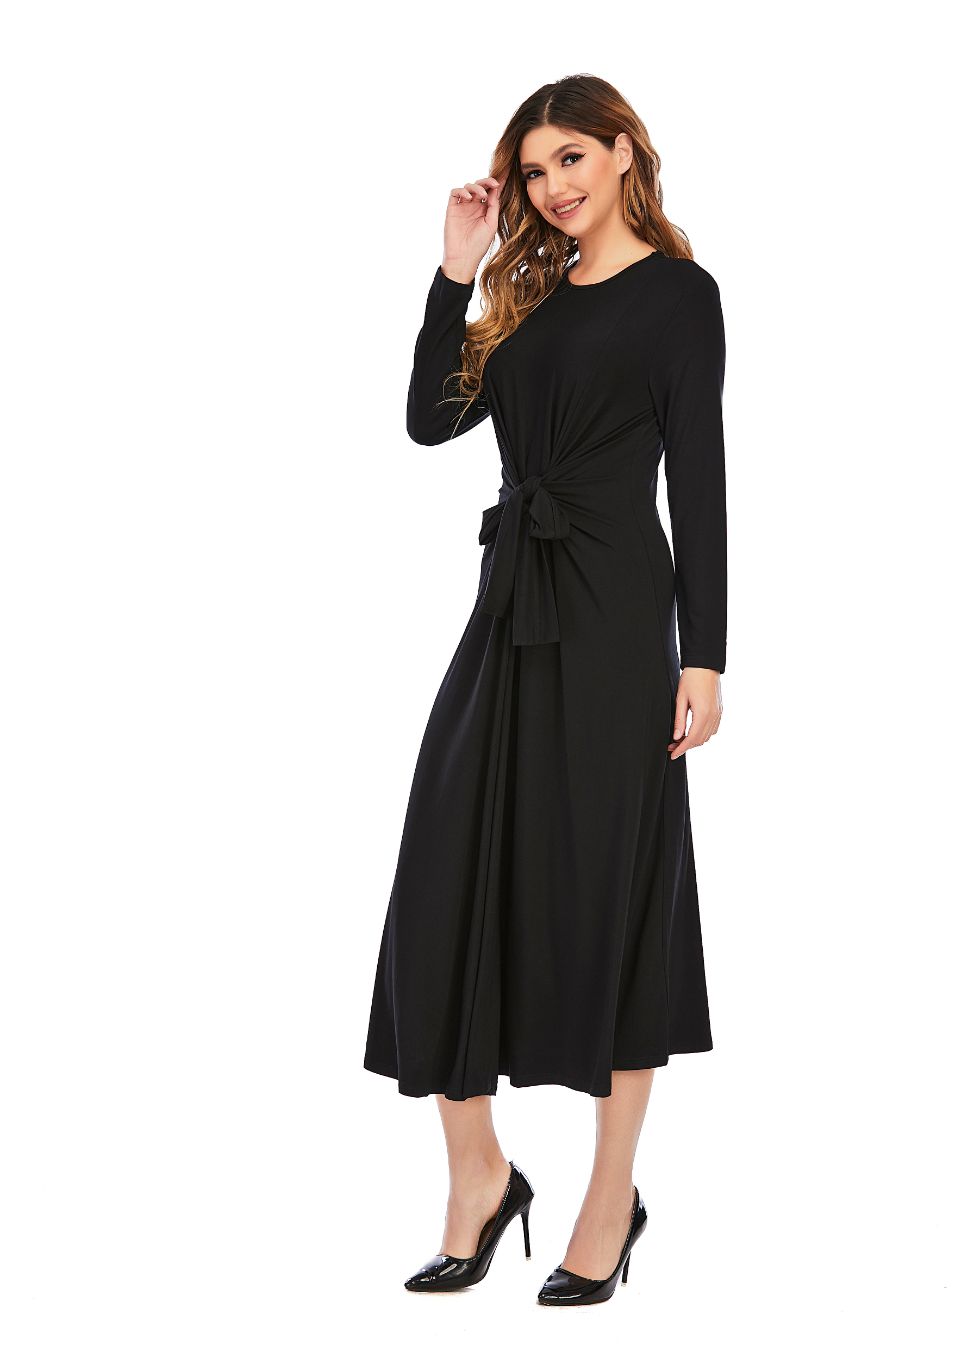 Long sleeve Knit Tie Front Midi Dress - figaliciousfood